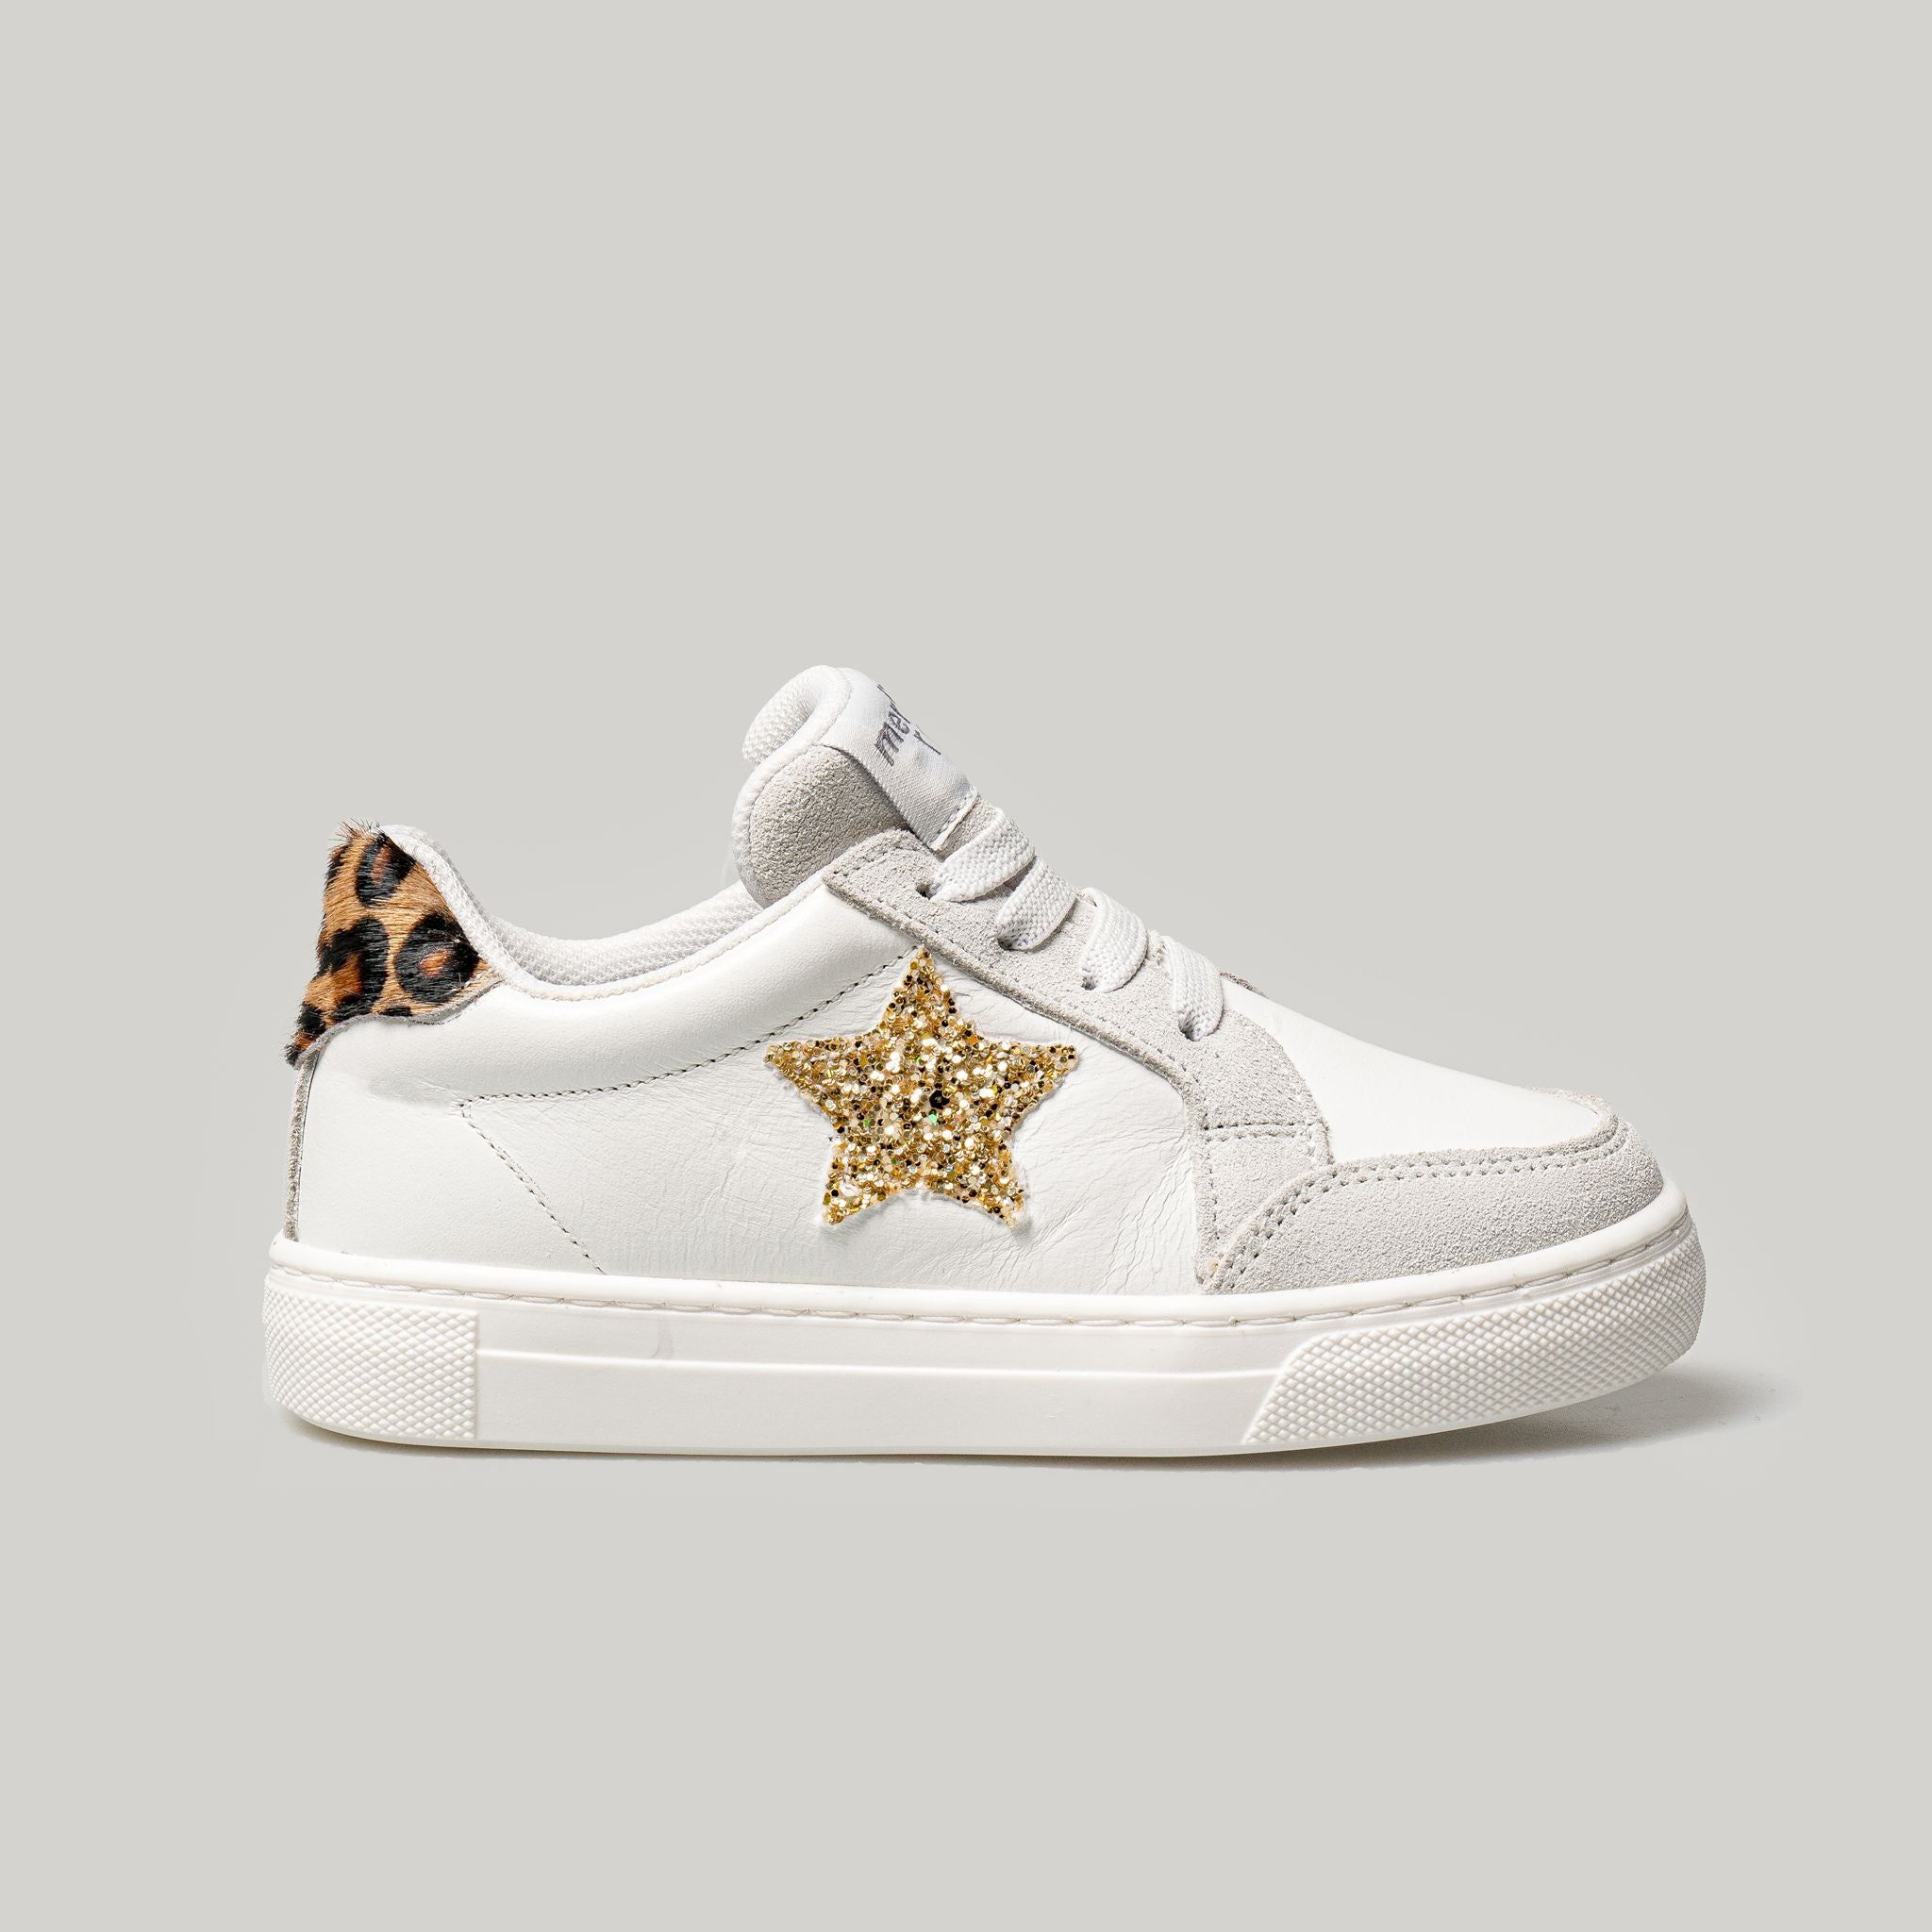 Gold star sneakers - Gold star sneakers - 21 - Merli & Rose - Melymod